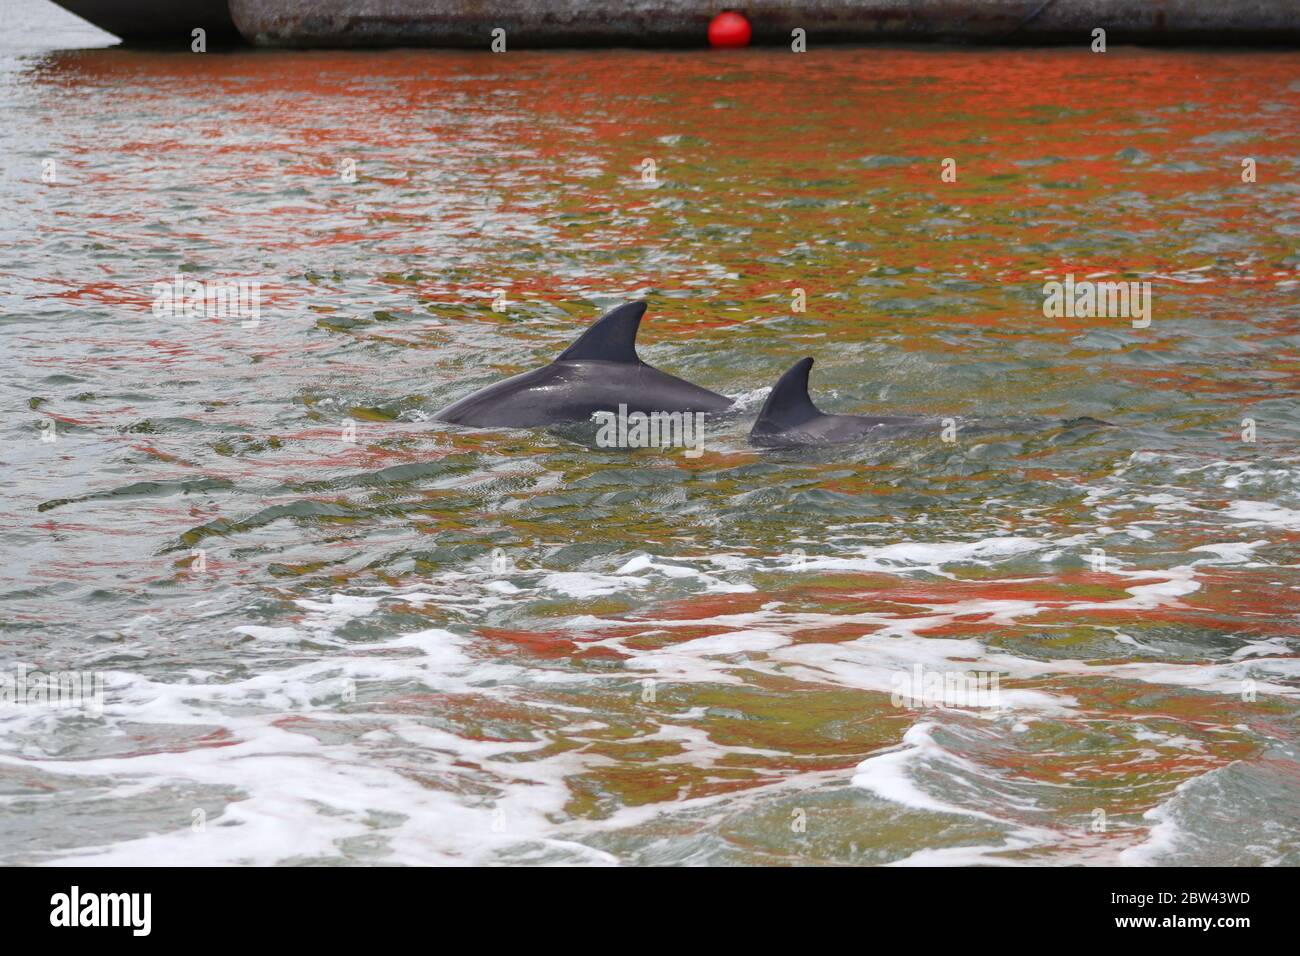 Two dolphins in their natural habitat of Galveston harbor, Texas Gulf Coast, USA. A rusty red brown dockyard is reflected in the water. Stock Photo